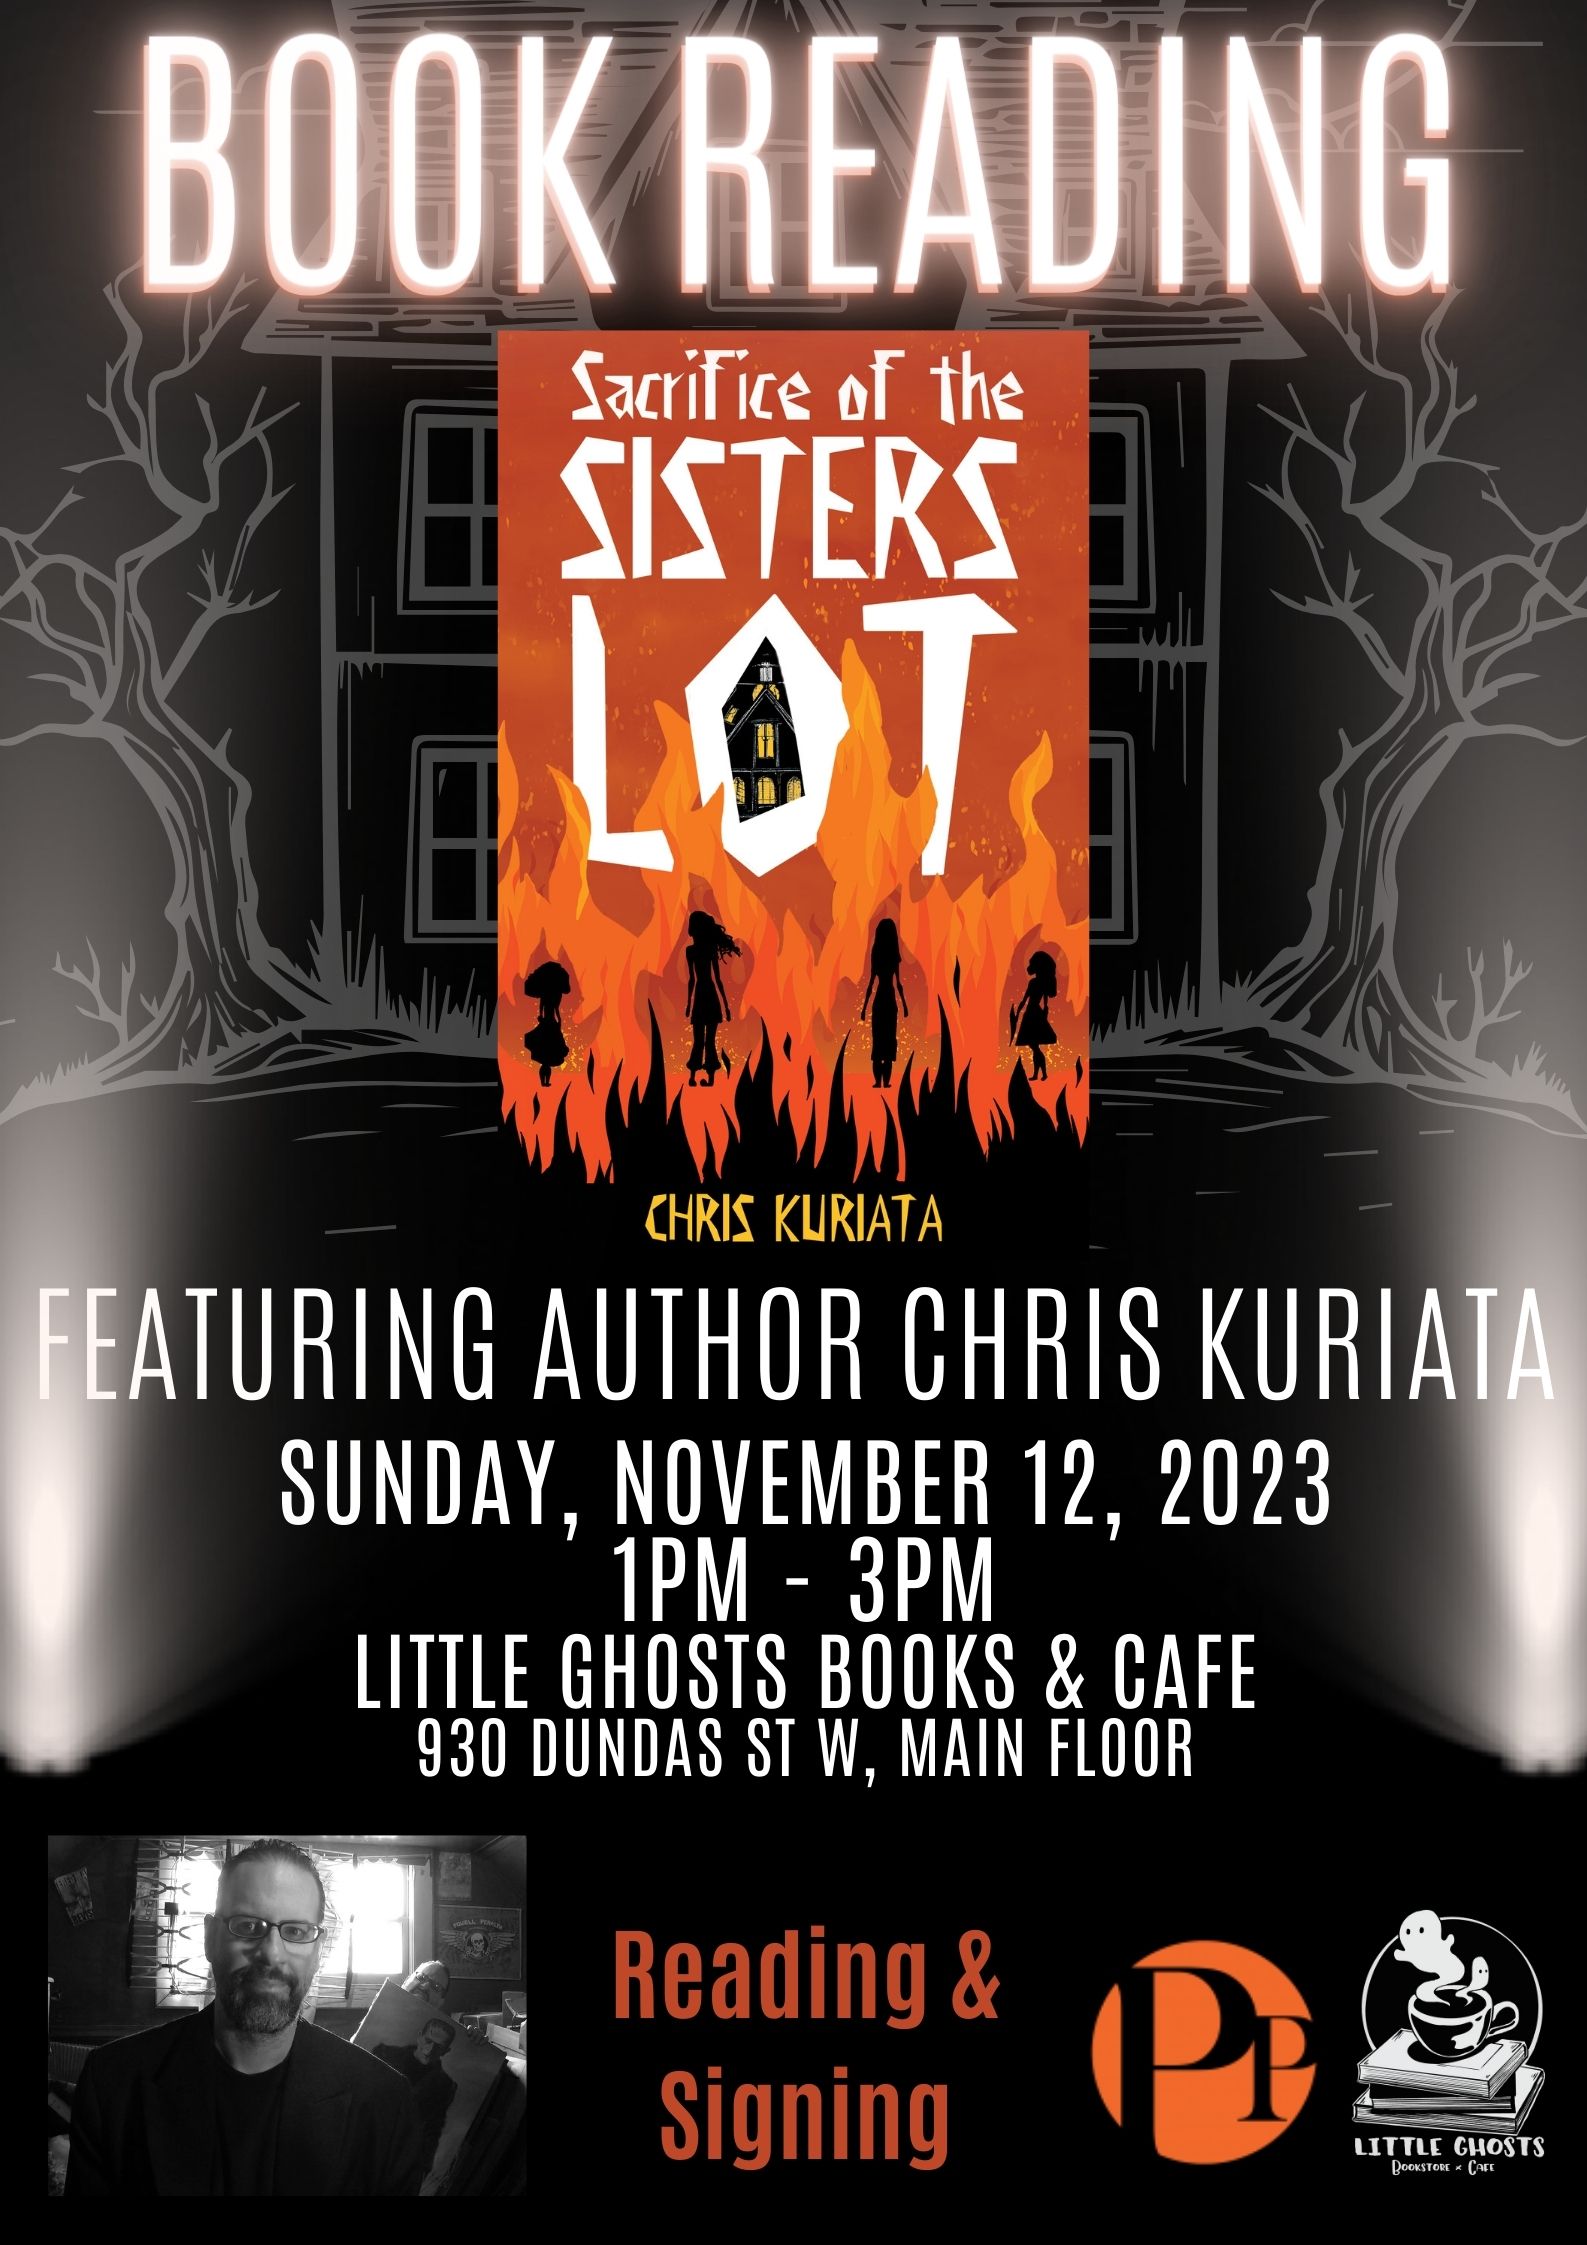 Book Cover and Author Photo, Book Cover Shows Silhouette Of Four Girls Against Ominous Wall Of Flames